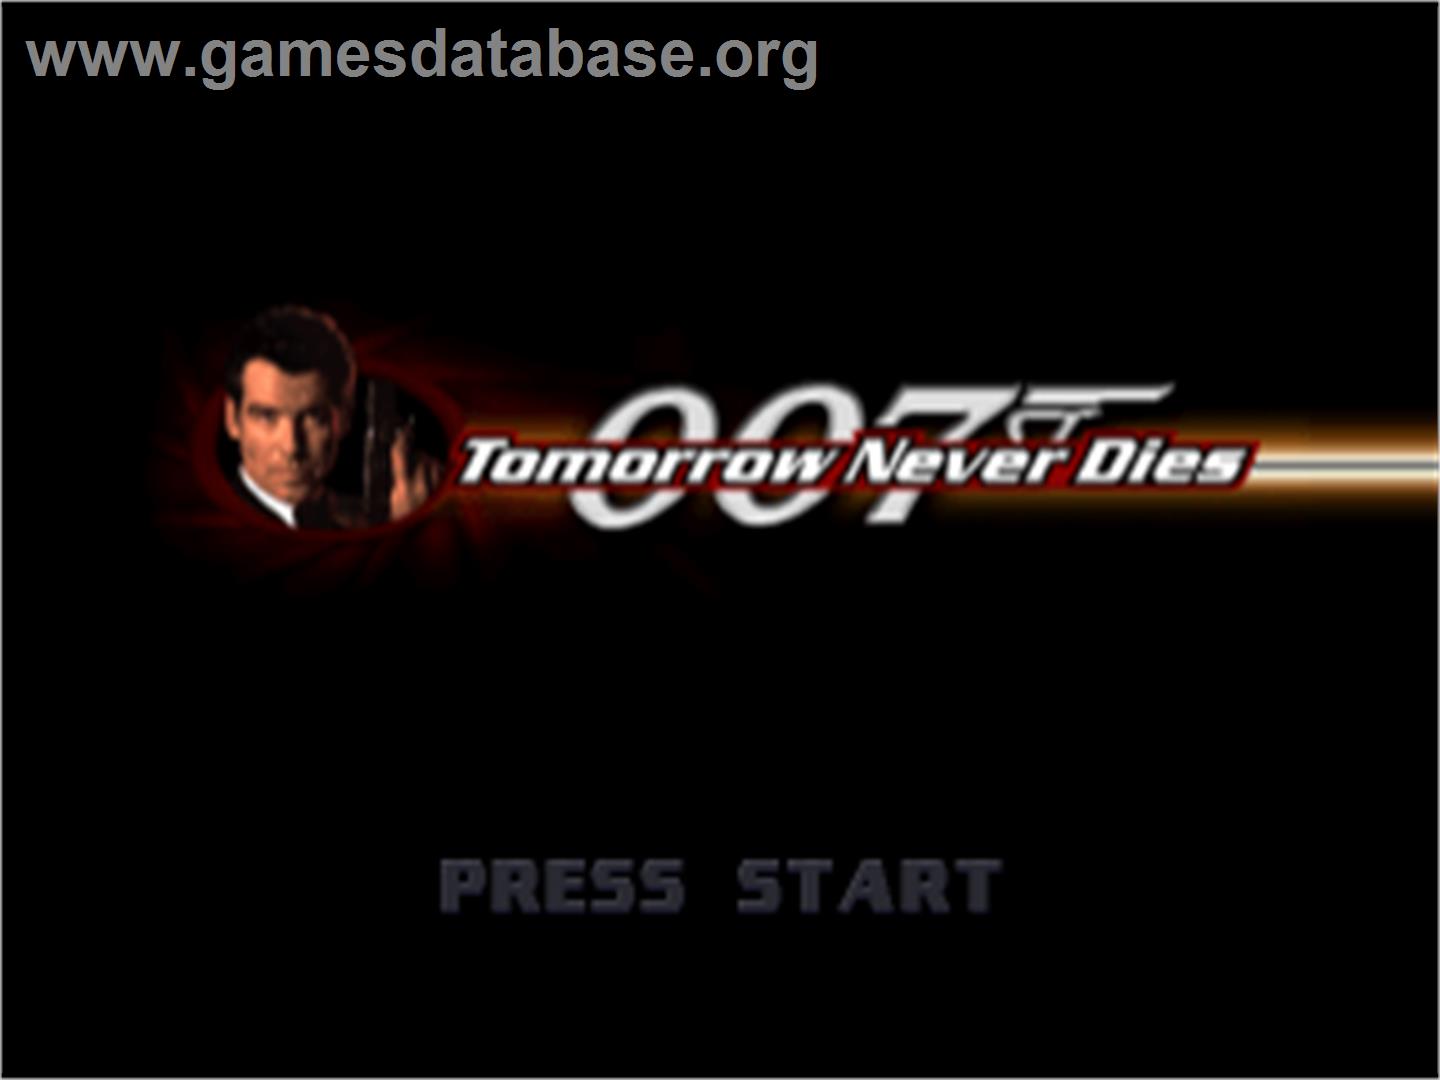 007: Tomorrow Never Dies - Sony Playstation - Artwork - Title Screen